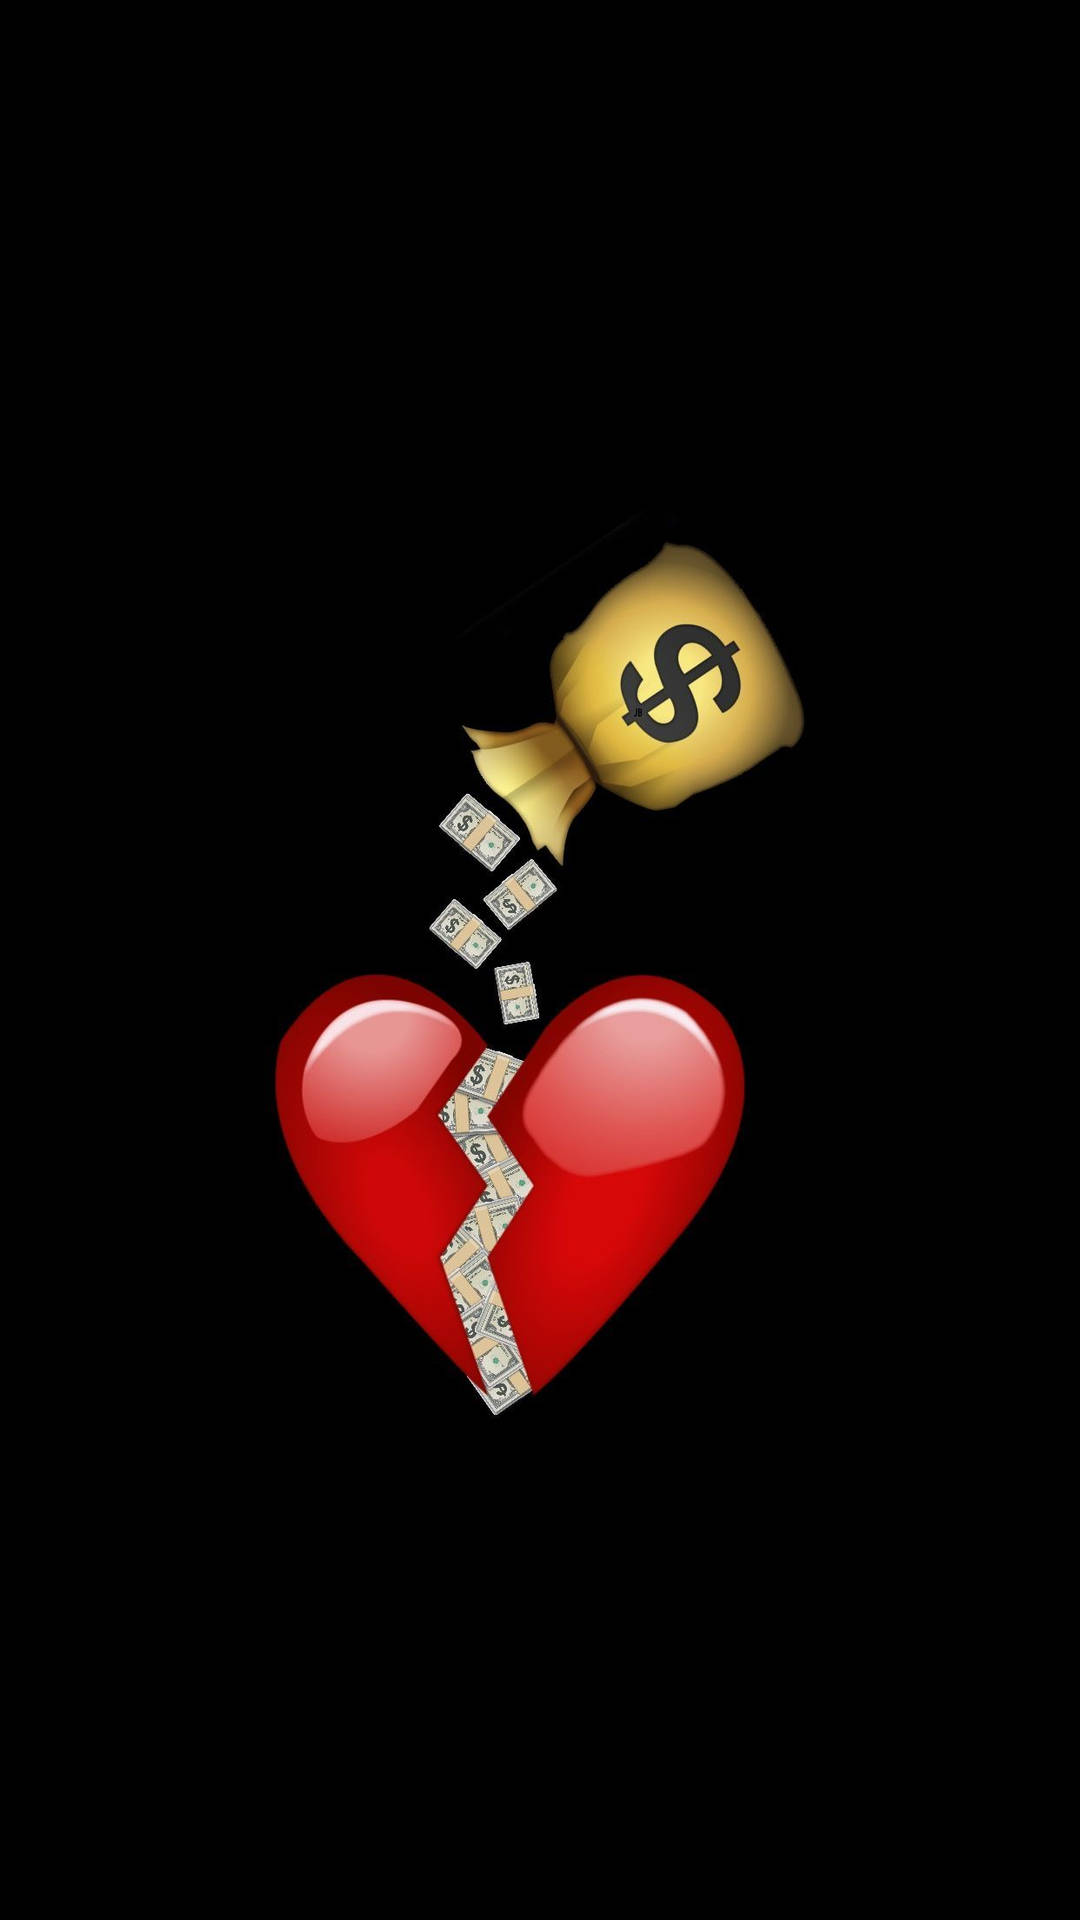 A Striking Depiction Of A Broken Heart Surrounded By Dollar Notes Background